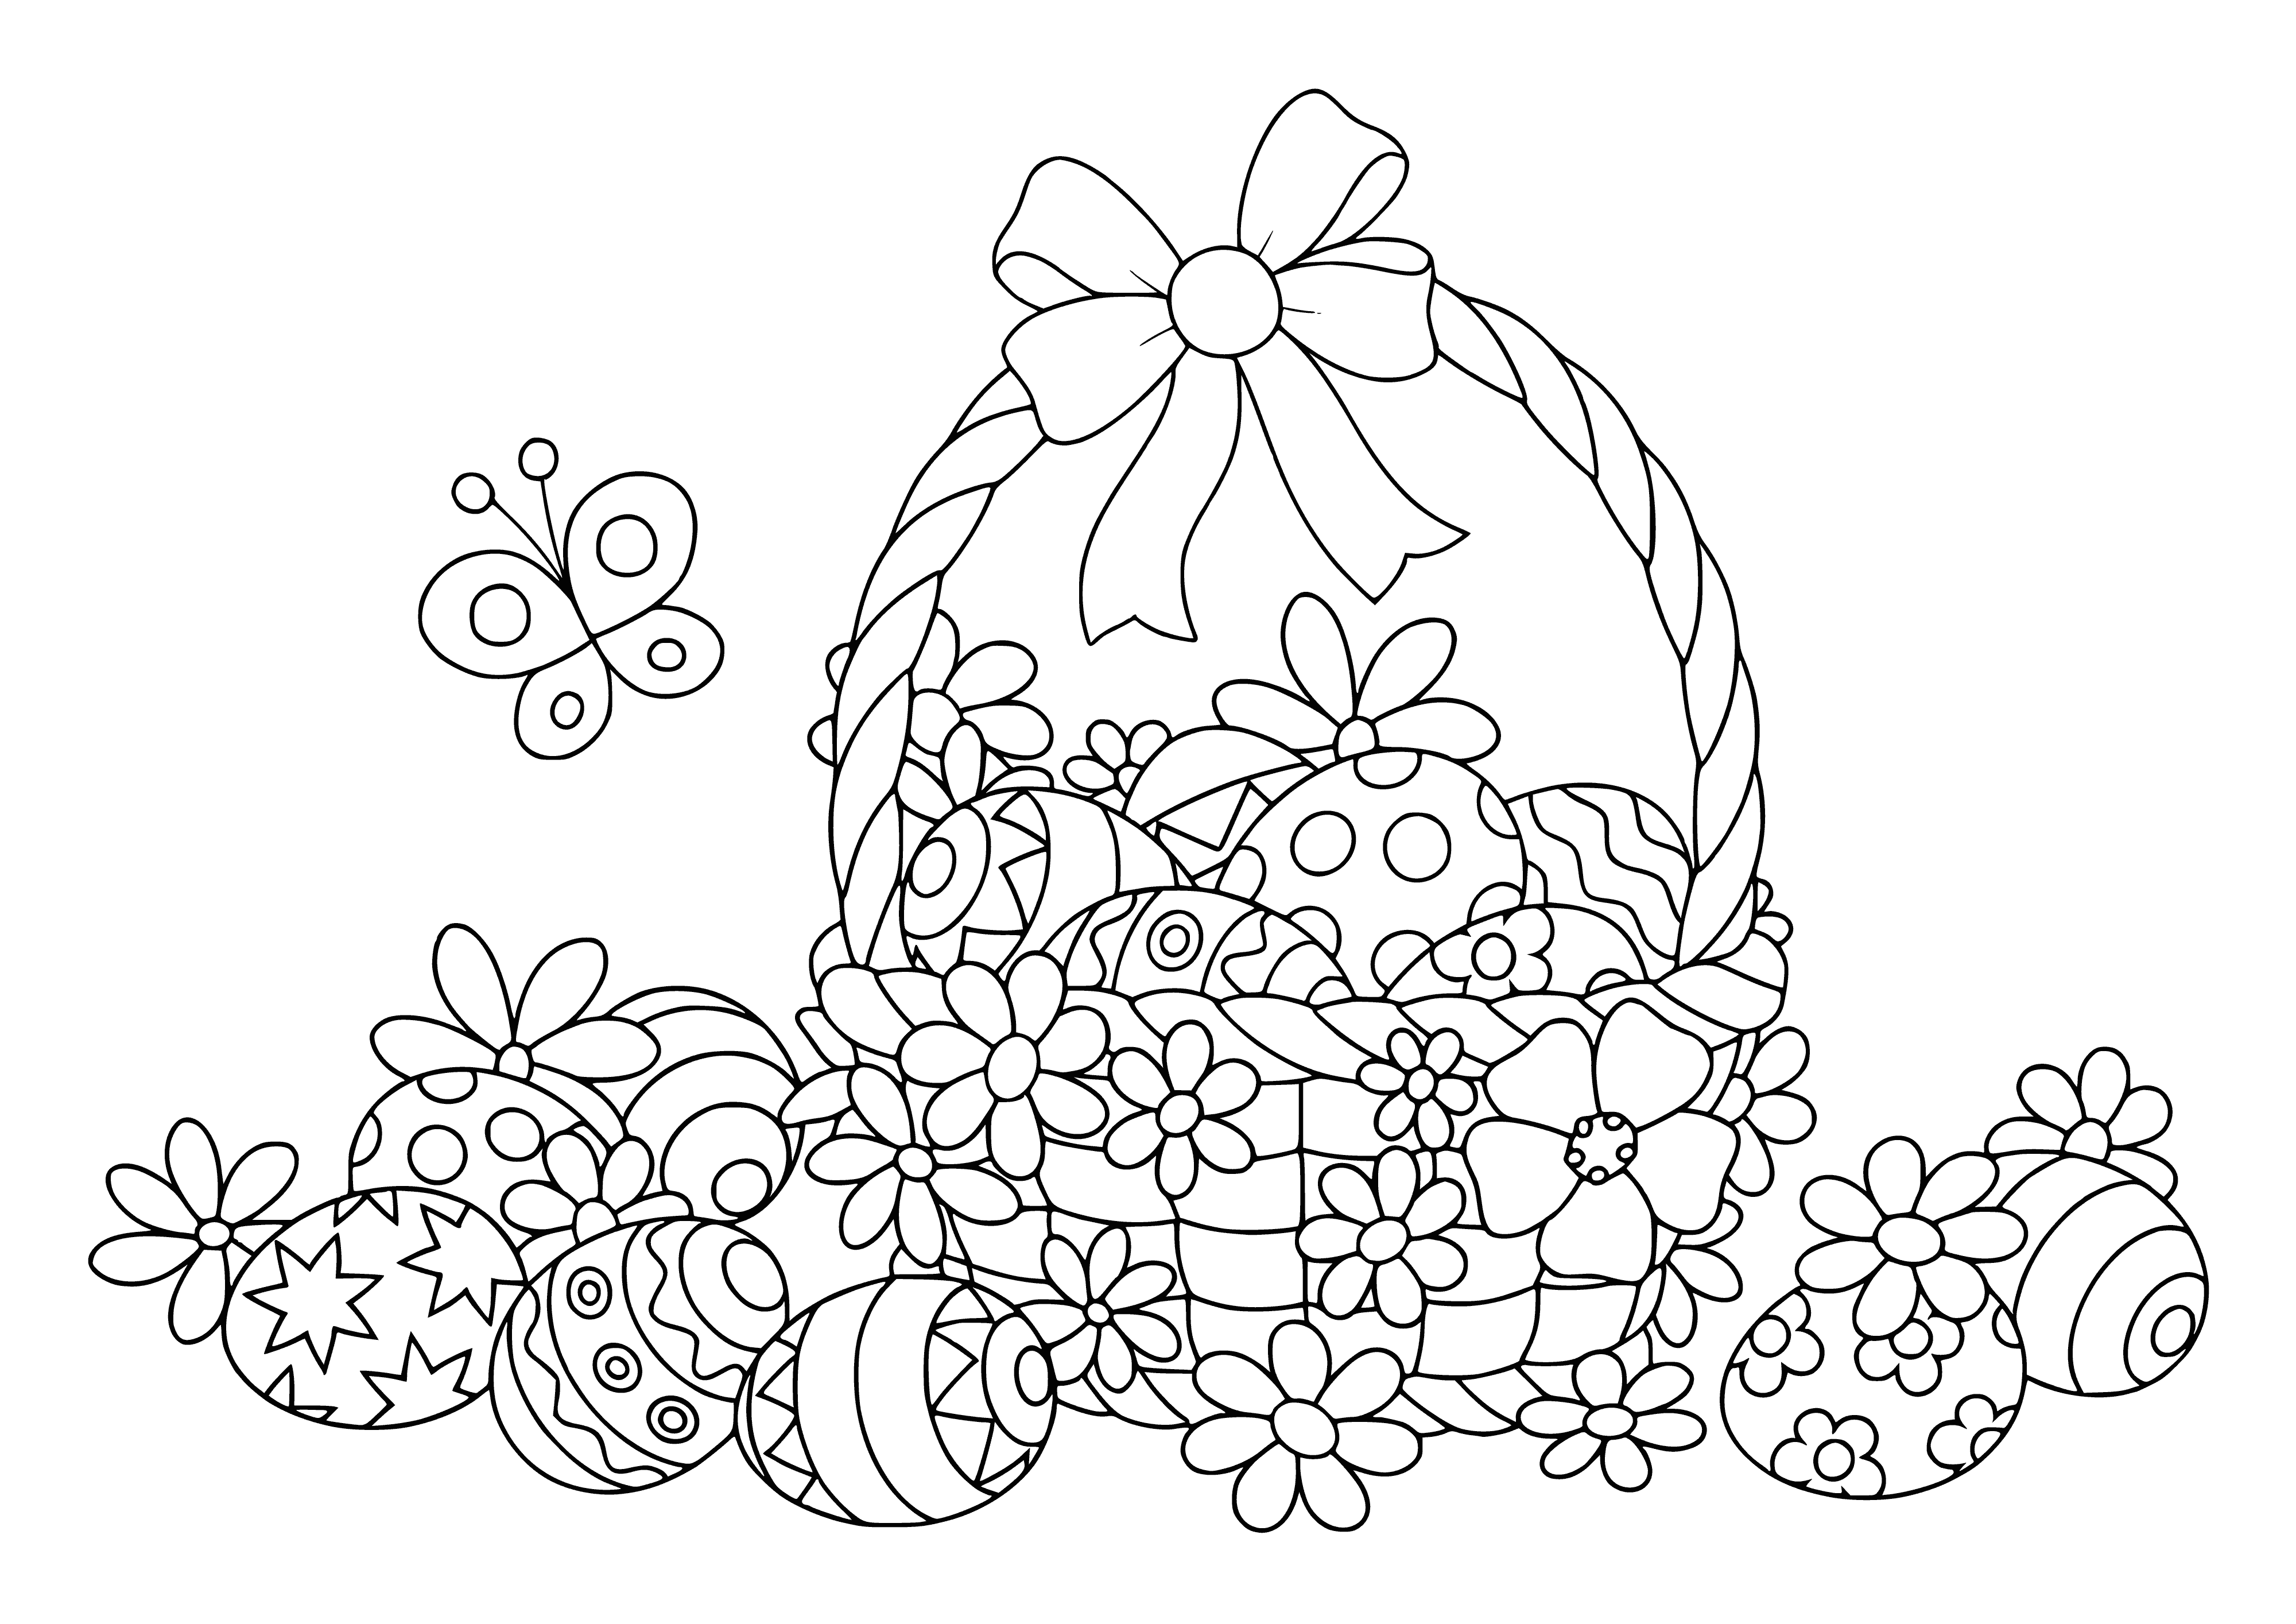 coloring page: With every egg having its own unique personality, they make a great addition to any Easter basket. 

Fun Easter eggs come in all colors, giving each its own unique personality. Perfect for any Easter basket! #EasterEggs